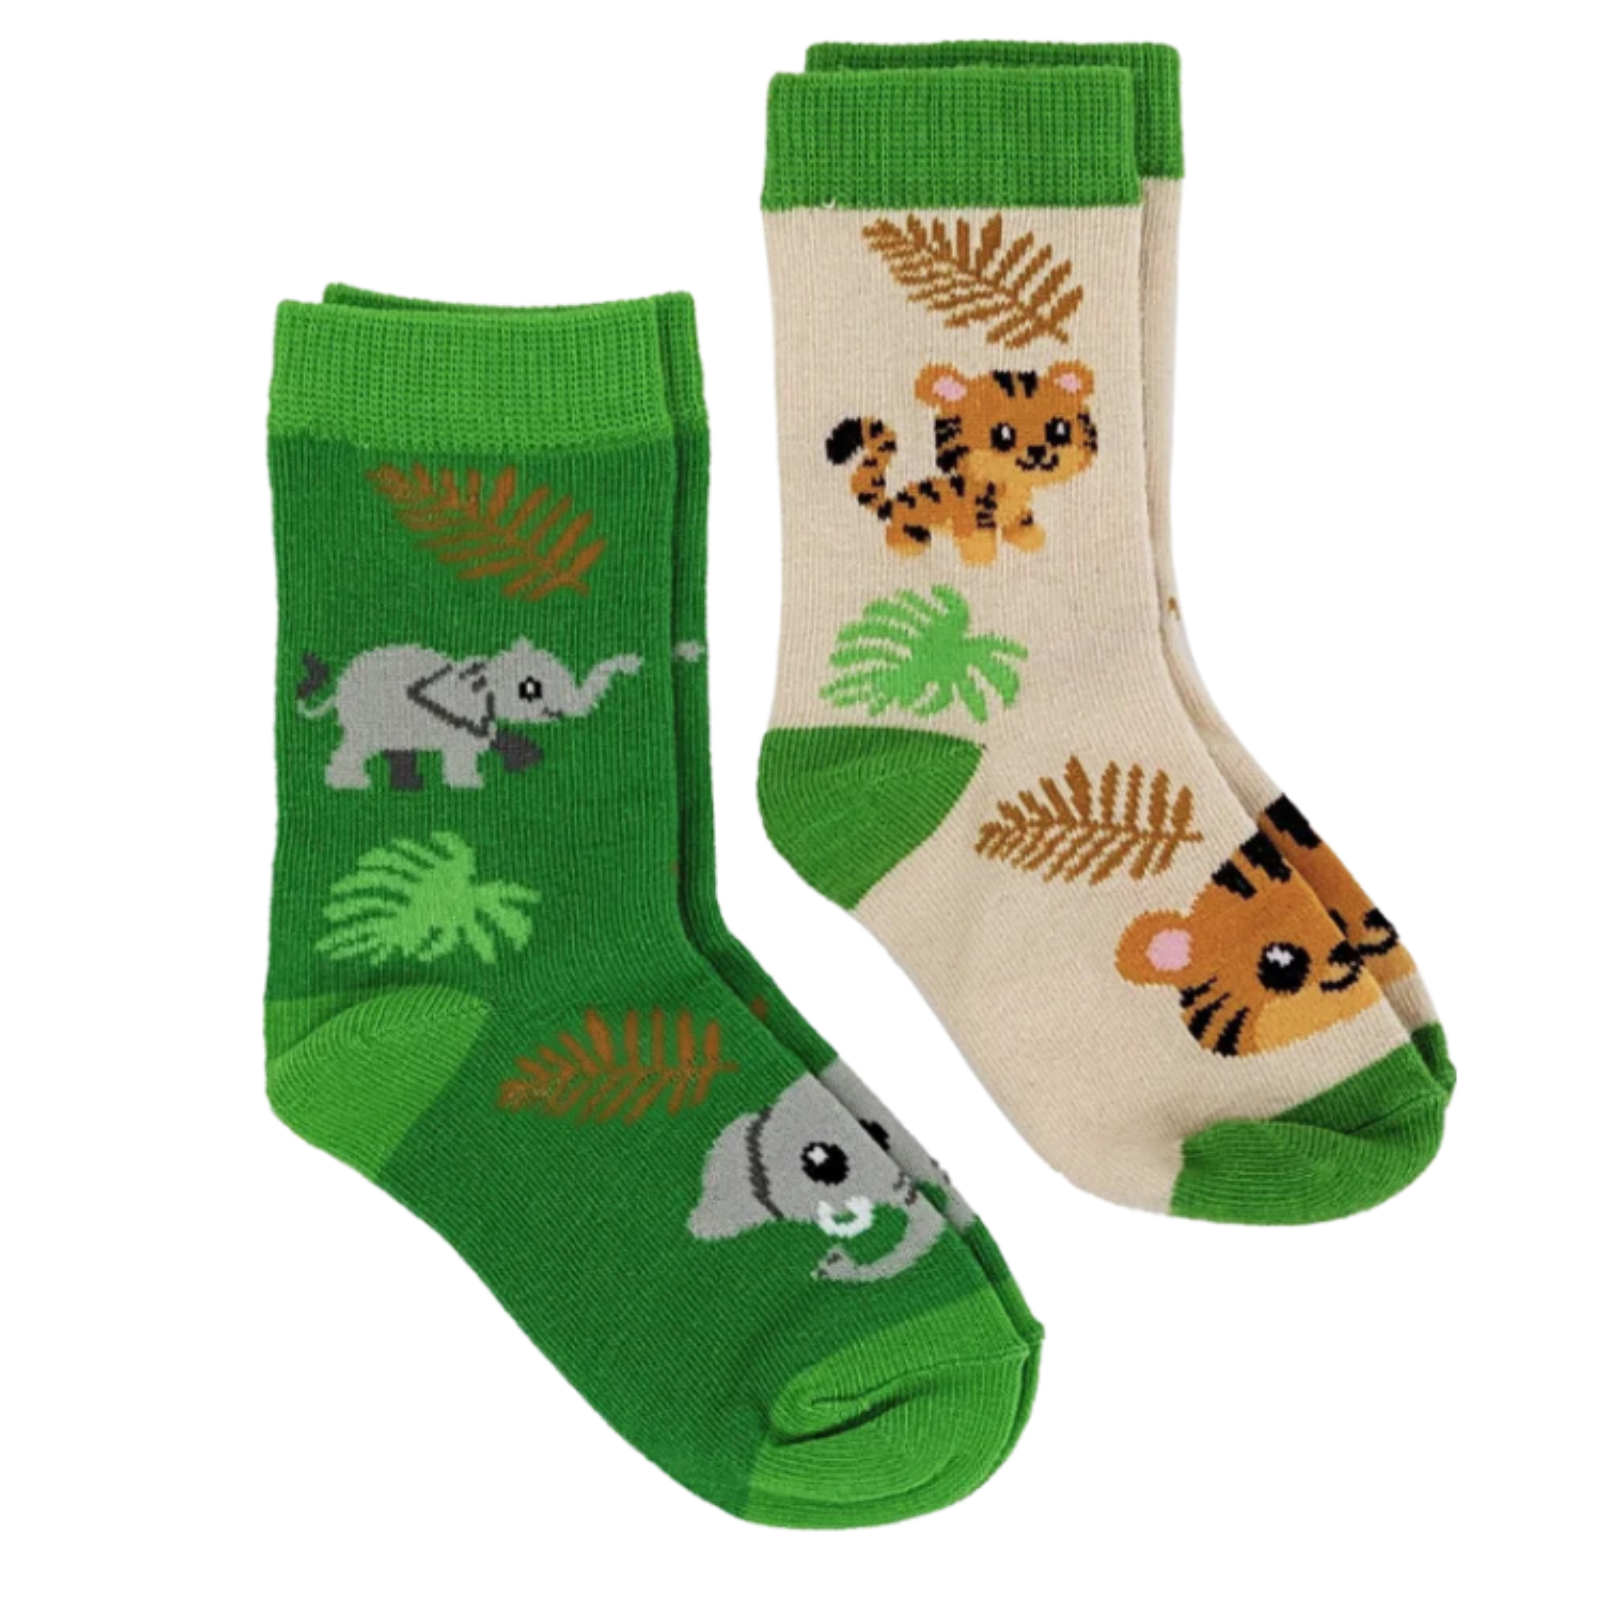 Sock Harbor Safari 2-pack kids' crew socks featuring green sock with elephants and beige sock with leopards. Socks shown laying flat on display.